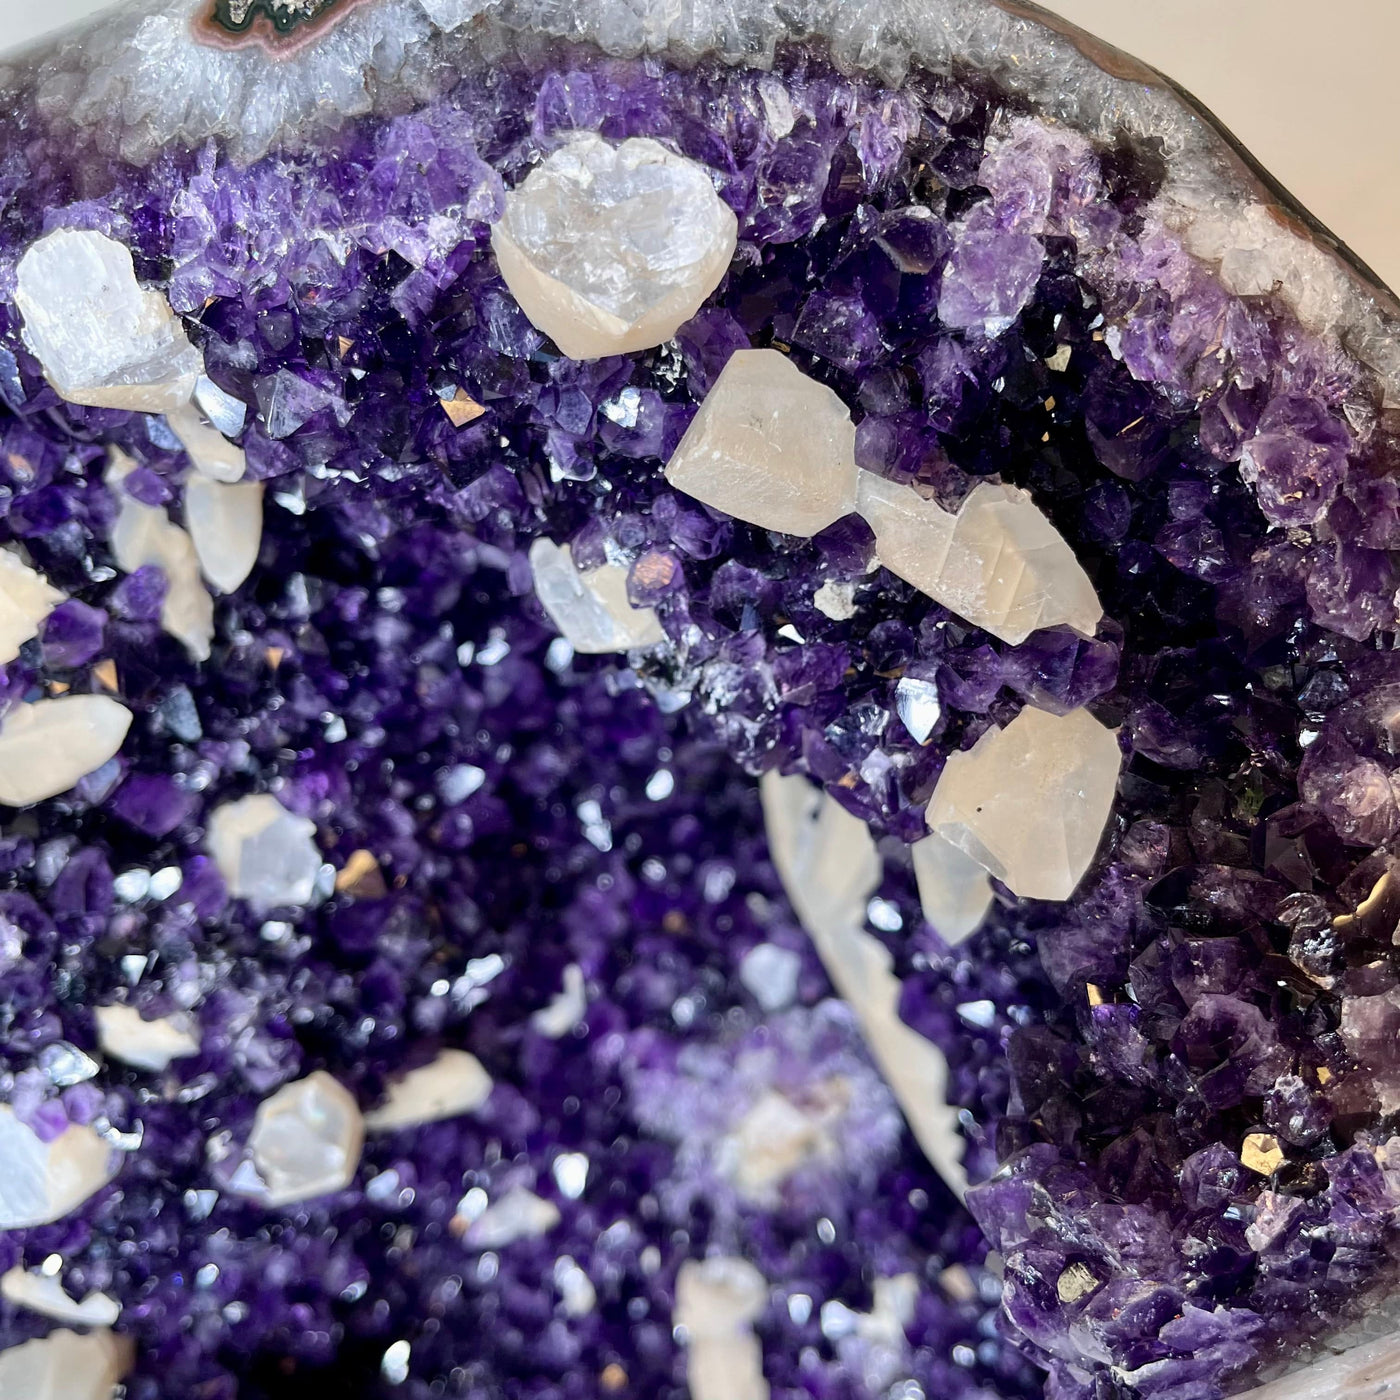 Up close view of crystal formations inside Large Dark Purple Amethyst and Calcite Geode.